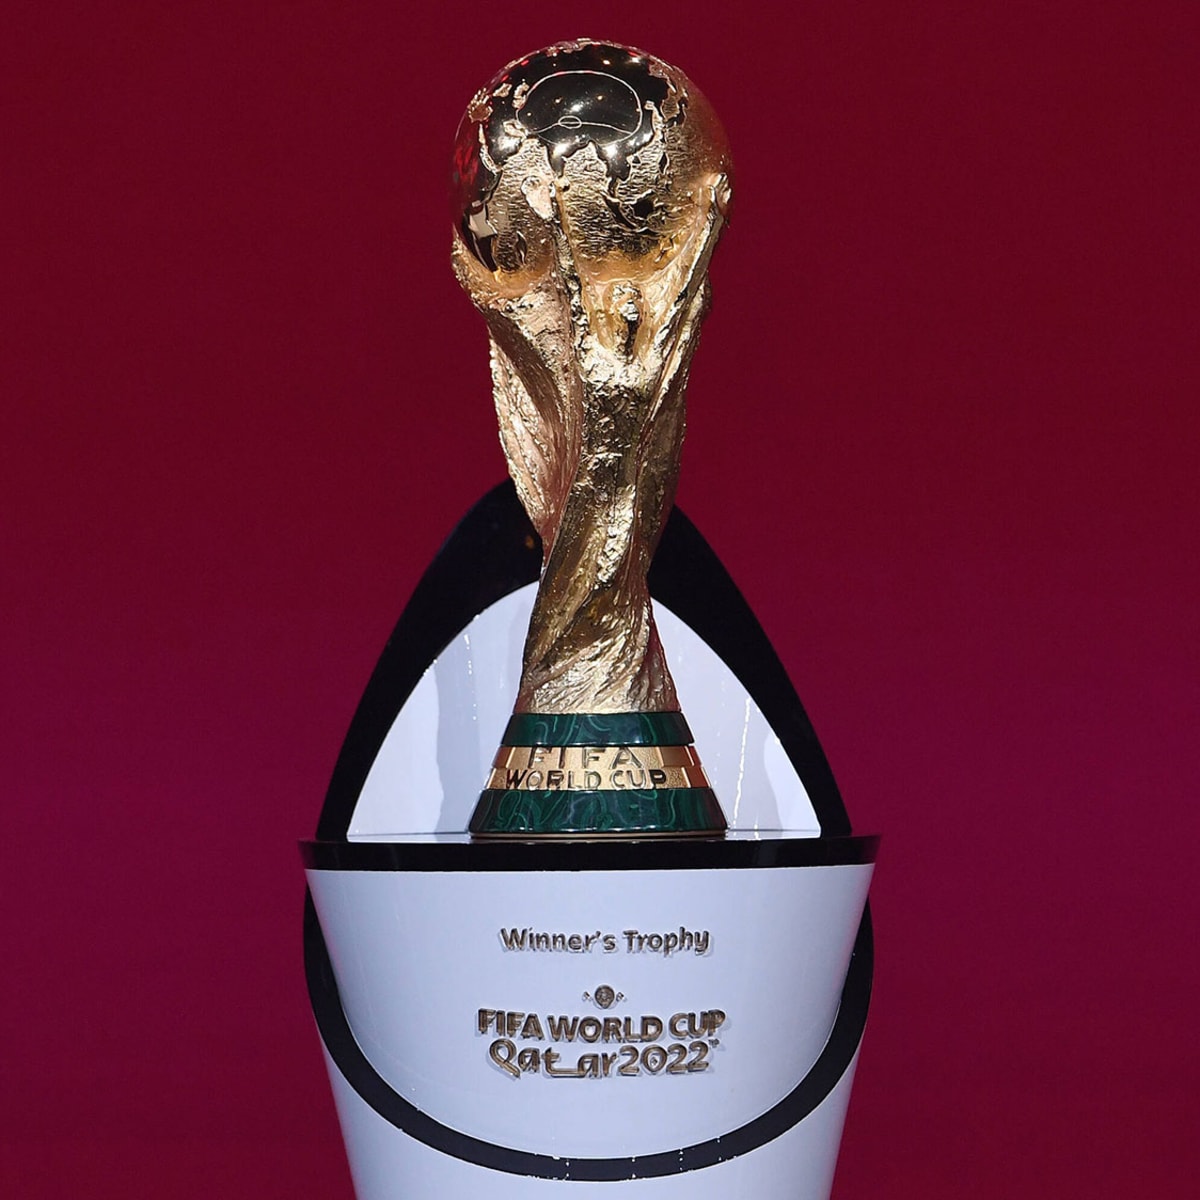 World Cup 2022: FIFA World Cup Qatar 2022: Who were the teams that  qualified for the next round and when are they playing?